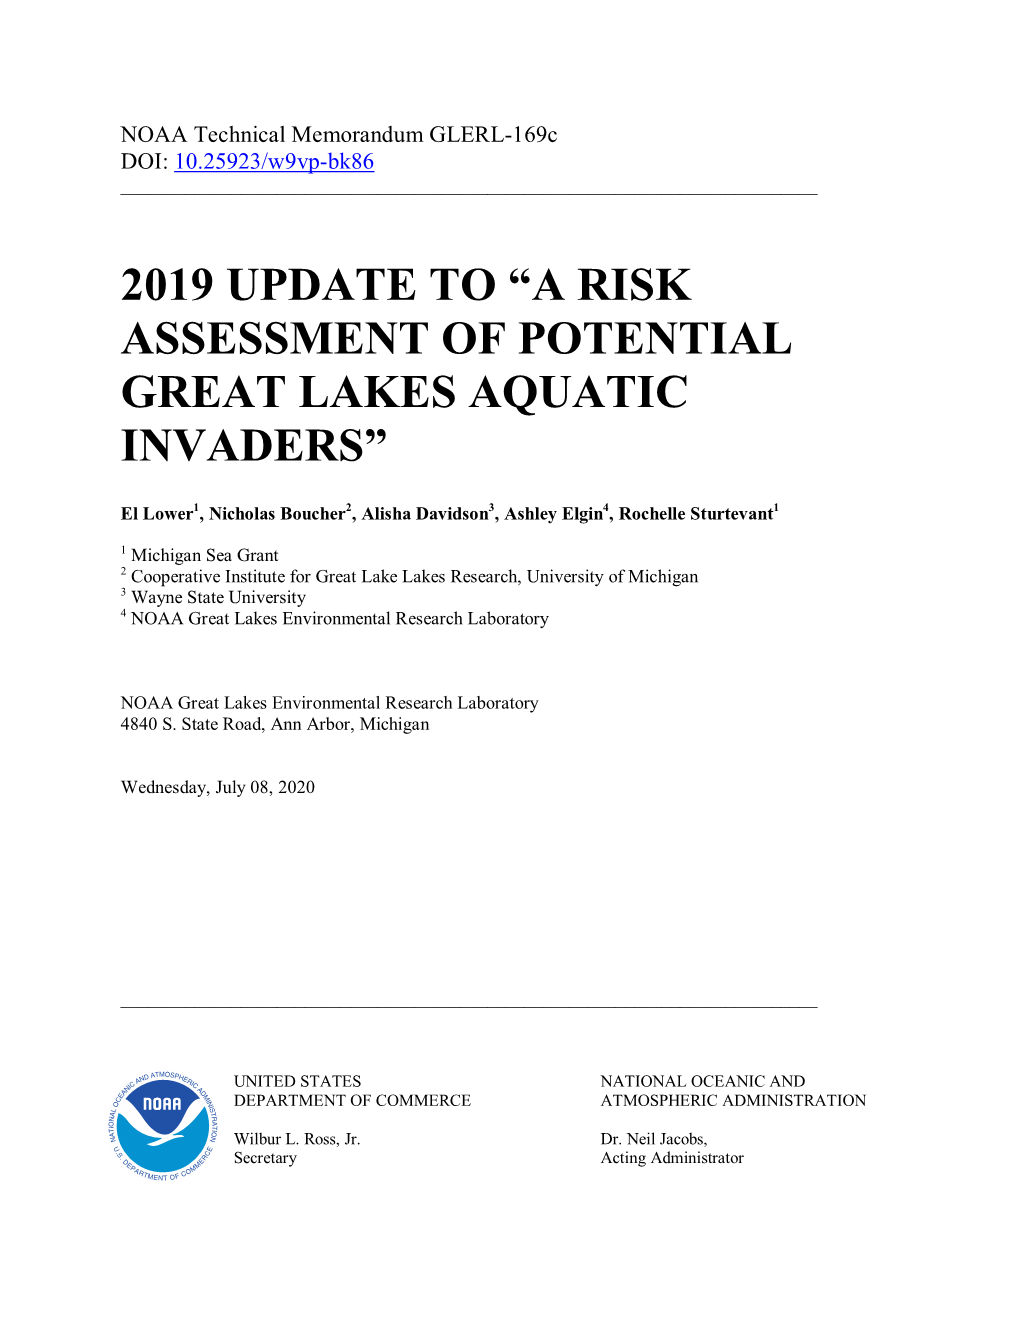 A Risk Assessment of Potential Great Lakes Aquatic Invaders”